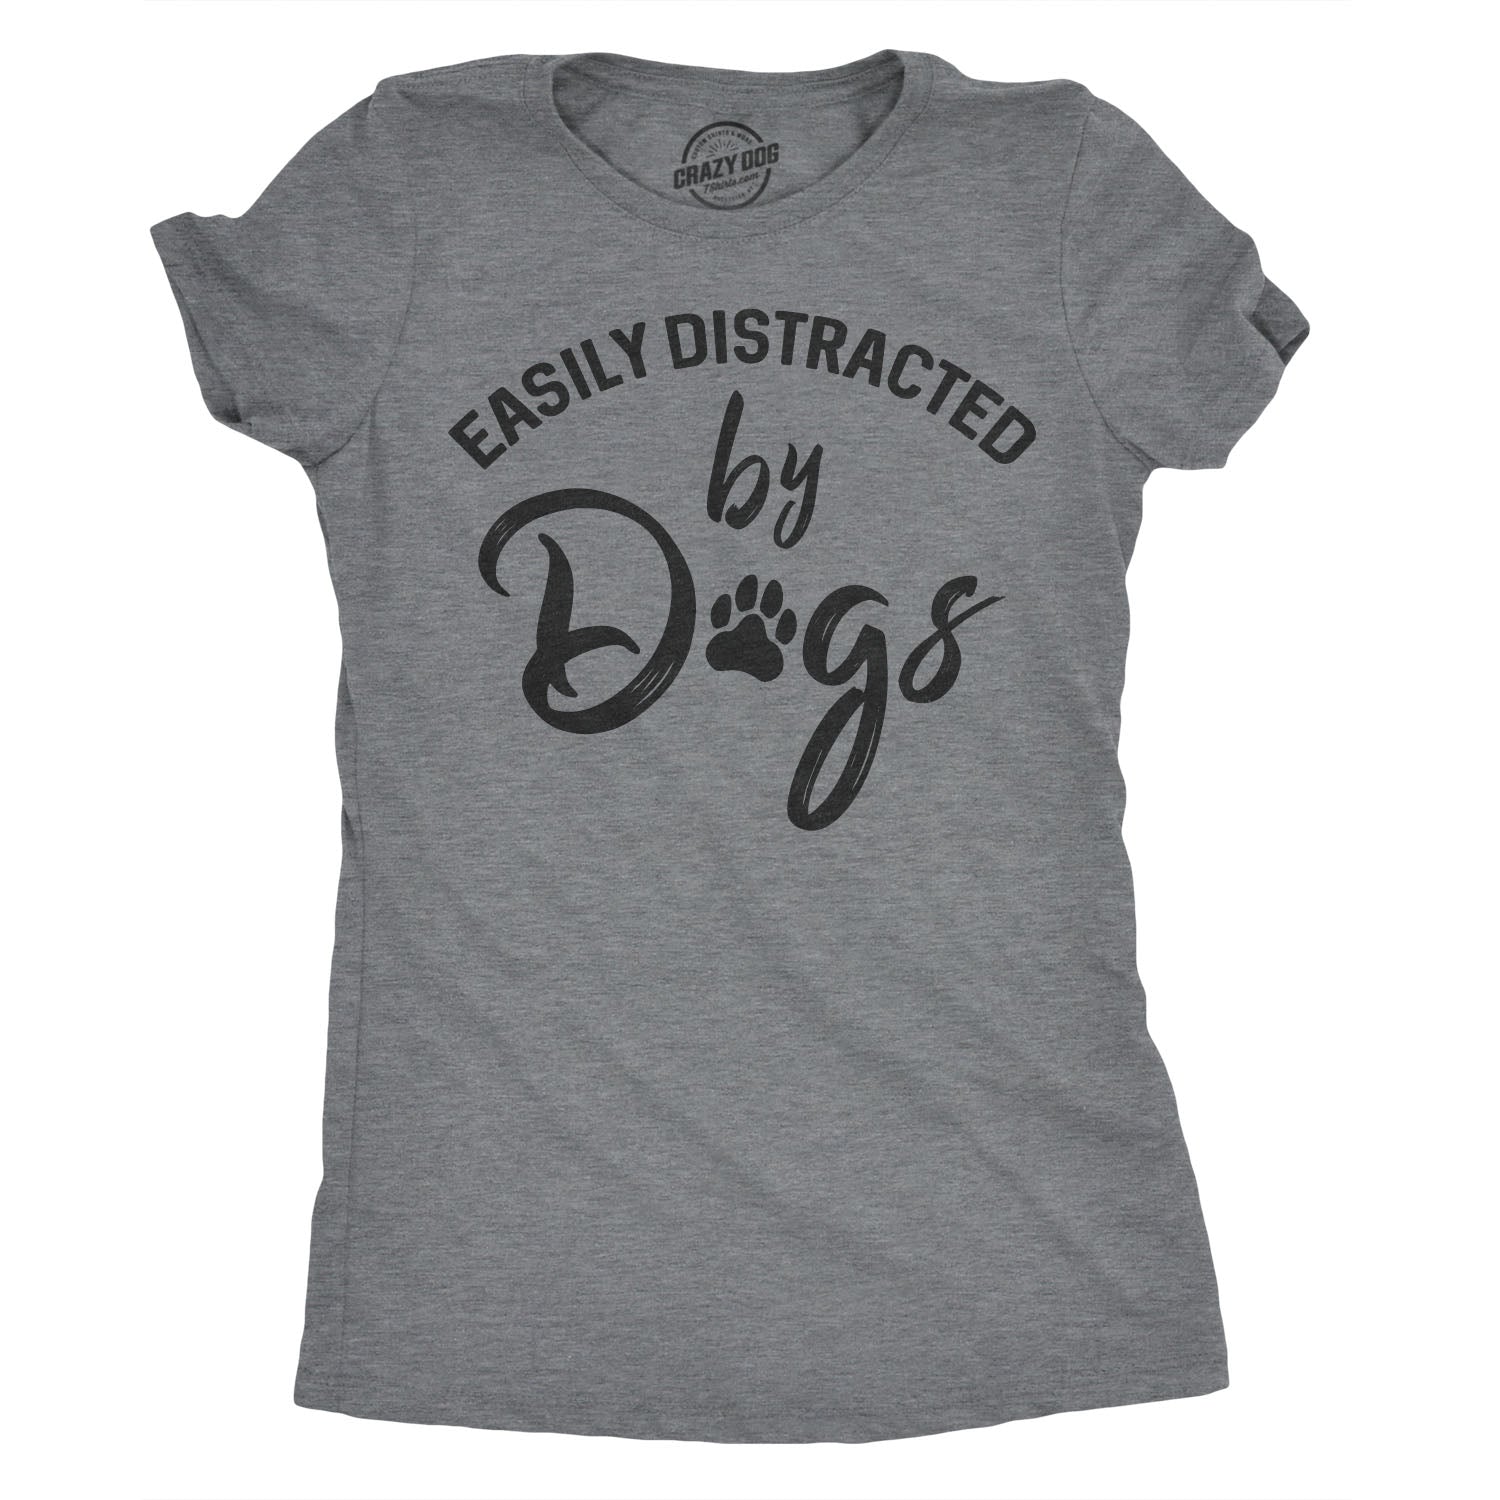 Funny Dark Heather Grey Easily Distracted By Dogs Womens T Shirt Nerdy Dog Tee